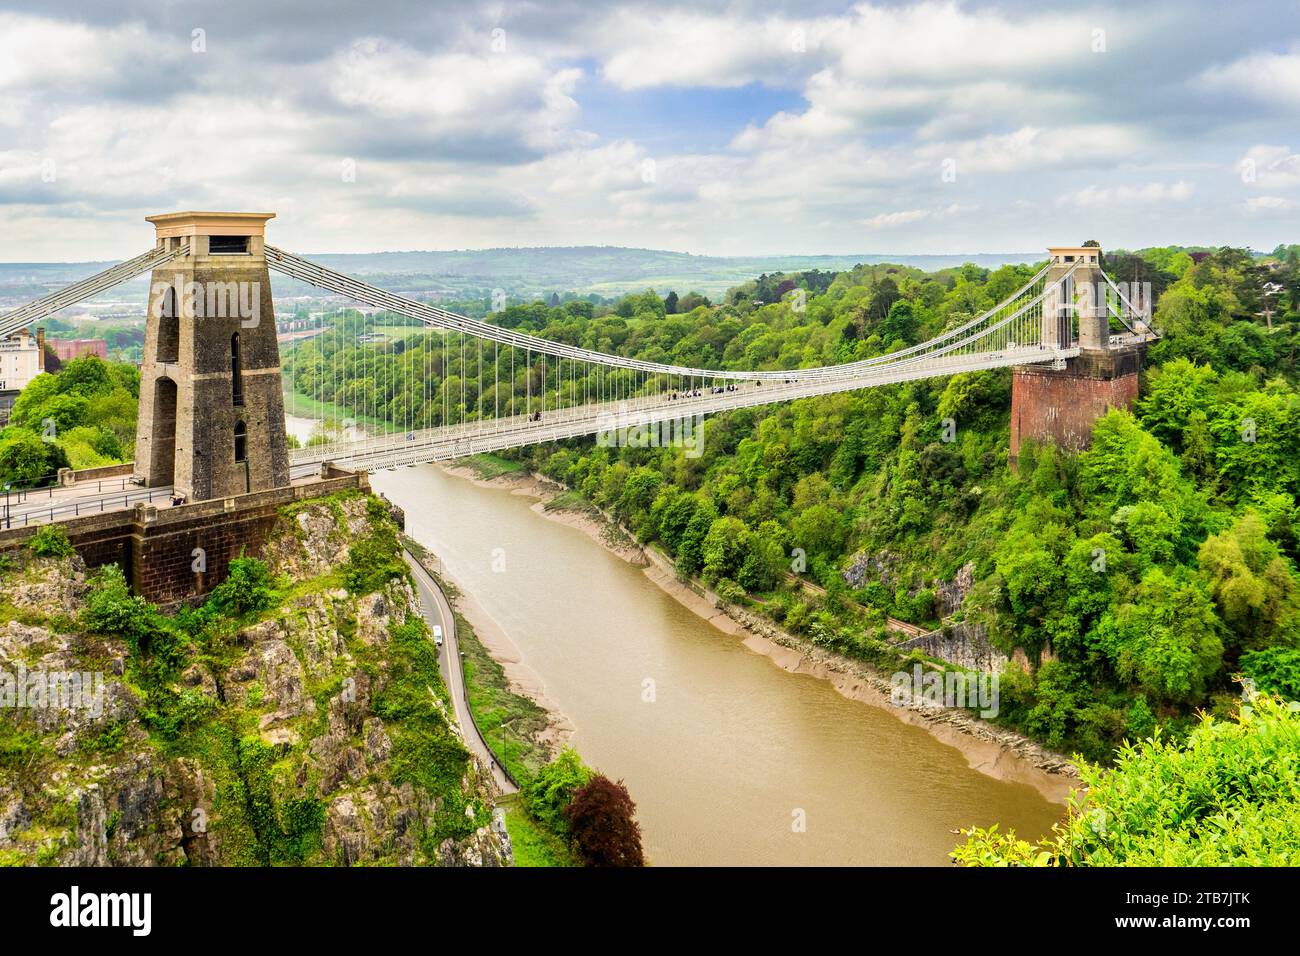 12 May 2023: Bristol, UK - Clifton Suspension Bridge, designed by I K Brunel, crossing the Avon Gorge downstream from central Bristol. Stock Photo